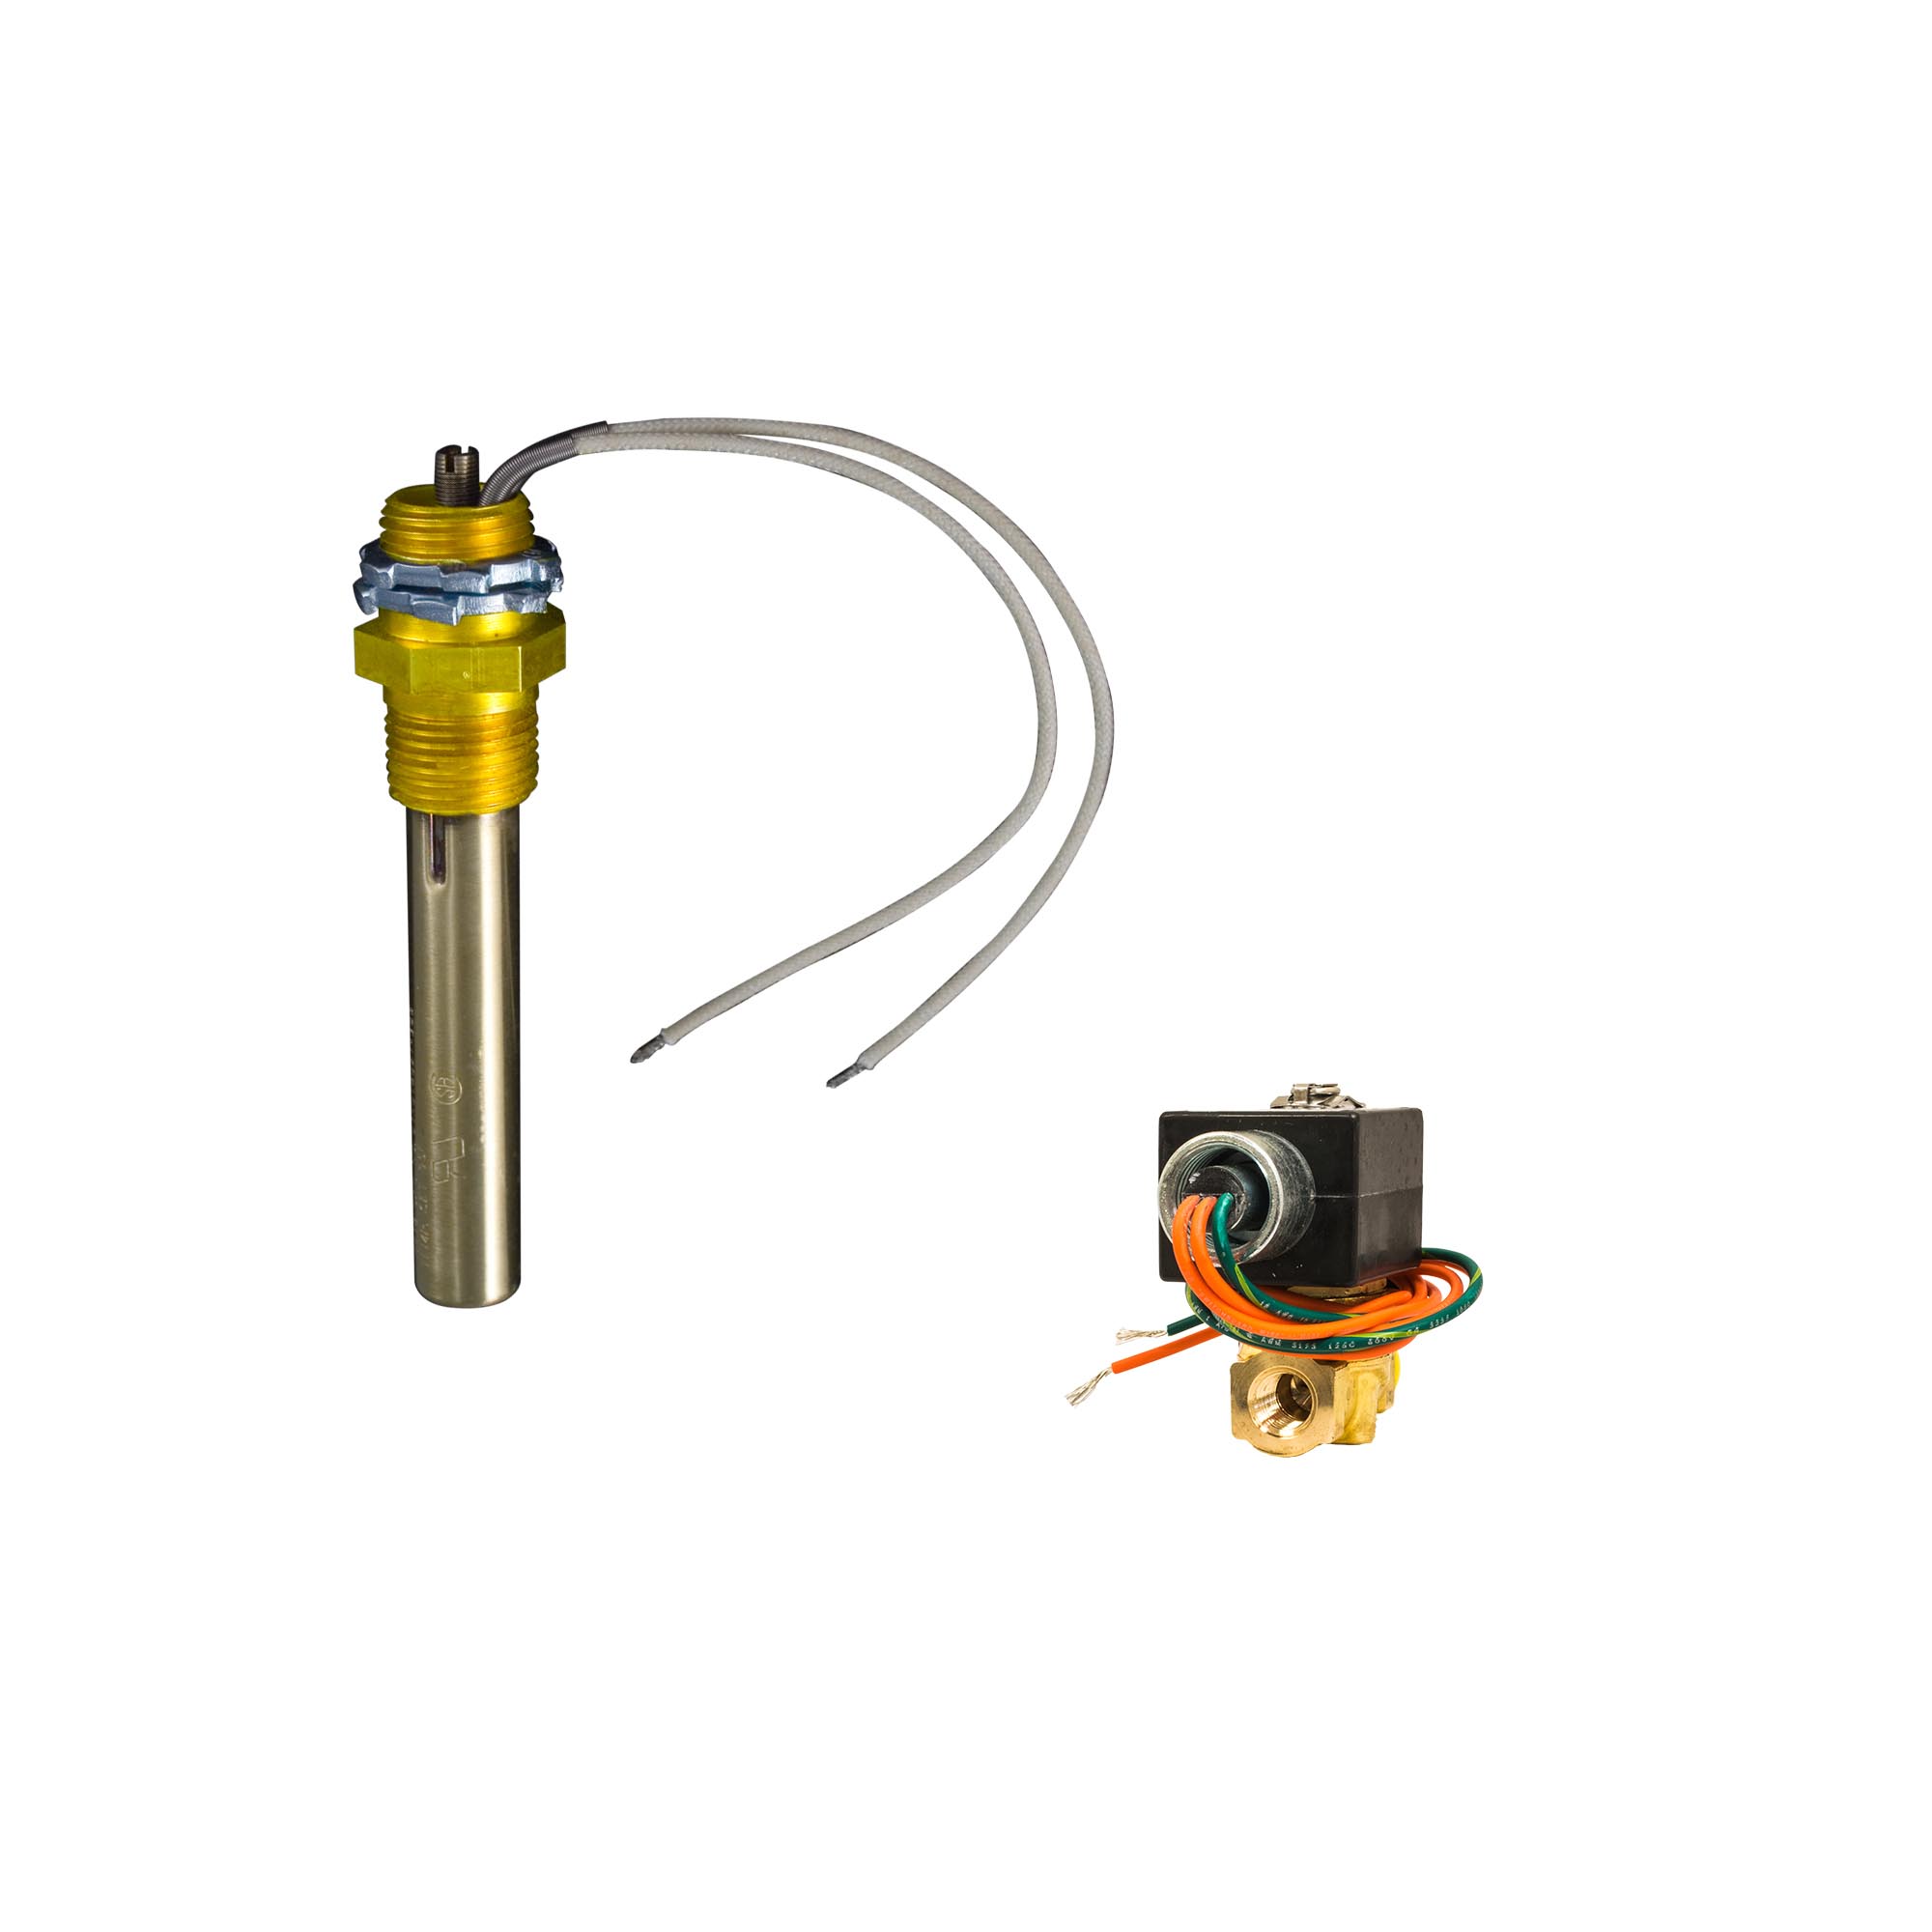 Solenoid Valve and Thermostat.